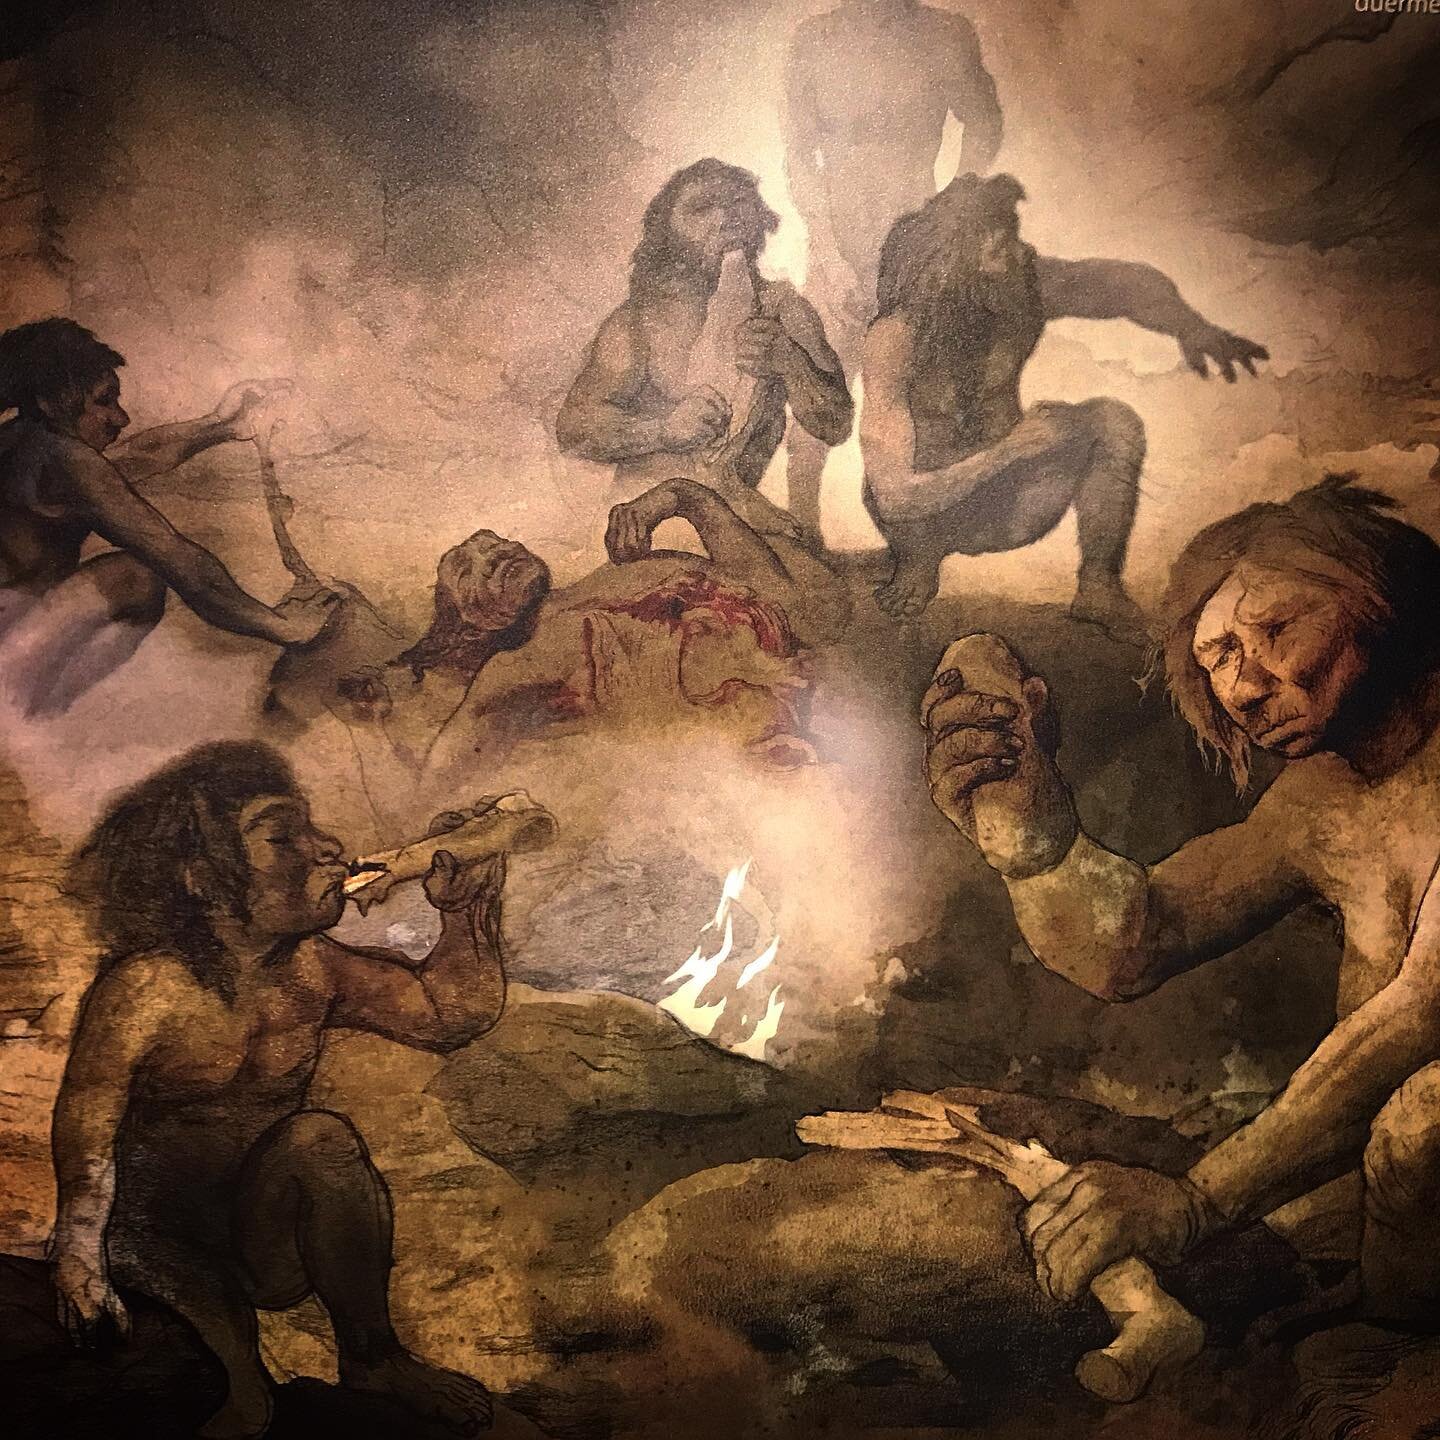 Last Supper.  Scene from 49,000 years ago.  A group of 13 Neanderthal individuals was eaten, and presumably killed by another group.

Current archaeological evidence indicates it could only have been their own species.  Neanderthals. Cannibalism.

It